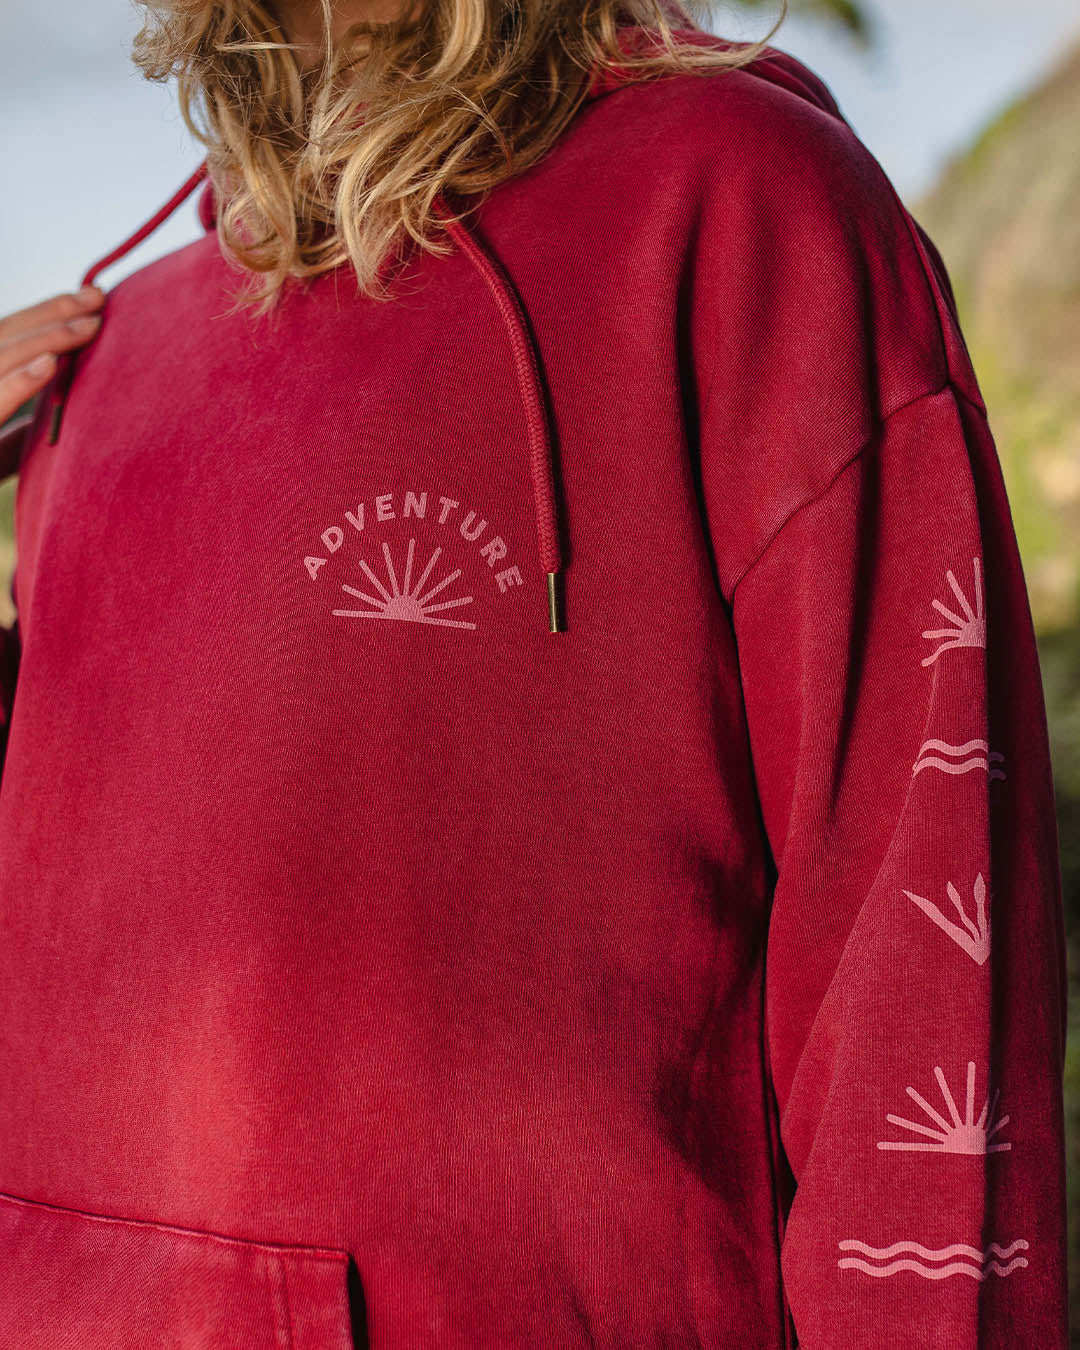 Roamers And Seekers Recycled Cotton Oversized Hoodie - Rhubarb